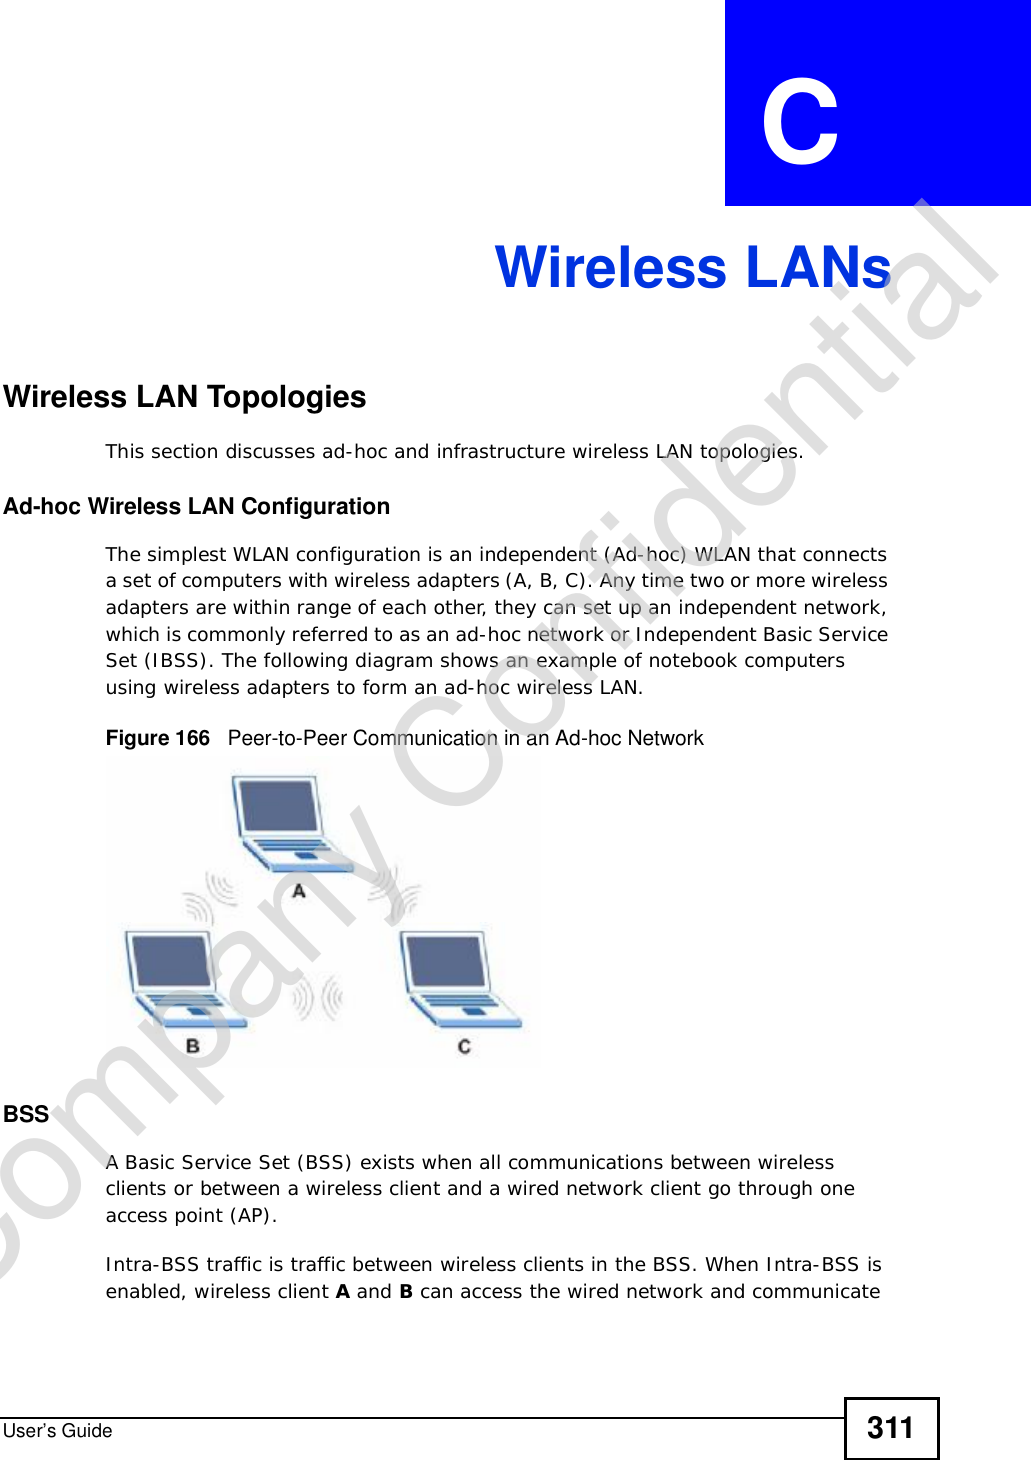 User’s Guide 311APPENDIX  C Wireless LANsWireless LAN TopologiesThis section discusses ad-hoc and infrastructure wireless LAN topologies.Ad-hoc Wireless LAN ConfigurationThe simplest WLAN configuration is an independent (Ad-hoc) WLAN that connects a set of computers with wireless adapters (A, B, C). Any time two or more wireless adapters are within range of each other, they can set up an independent network, which is commonly referred to as an ad-hoc network or Independent Basic Service Set (IBSS). The following diagram shows an example of notebook computers using wireless adapters to form an ad-hoc wireless LAN. Figure 166   Peer-to-Peer Communication in an Ad-hoc NetworkBSSA Basic Service Set (BSS) exists when all communications between wireless clients or between a wireless client and a wired network client go through one access point (AP). Intra-BSS traffic is traffic between wireless clients in the BSS. When Intra-BSS is enabled, wireless client A and B can access the wired network and communicate Company Confidential